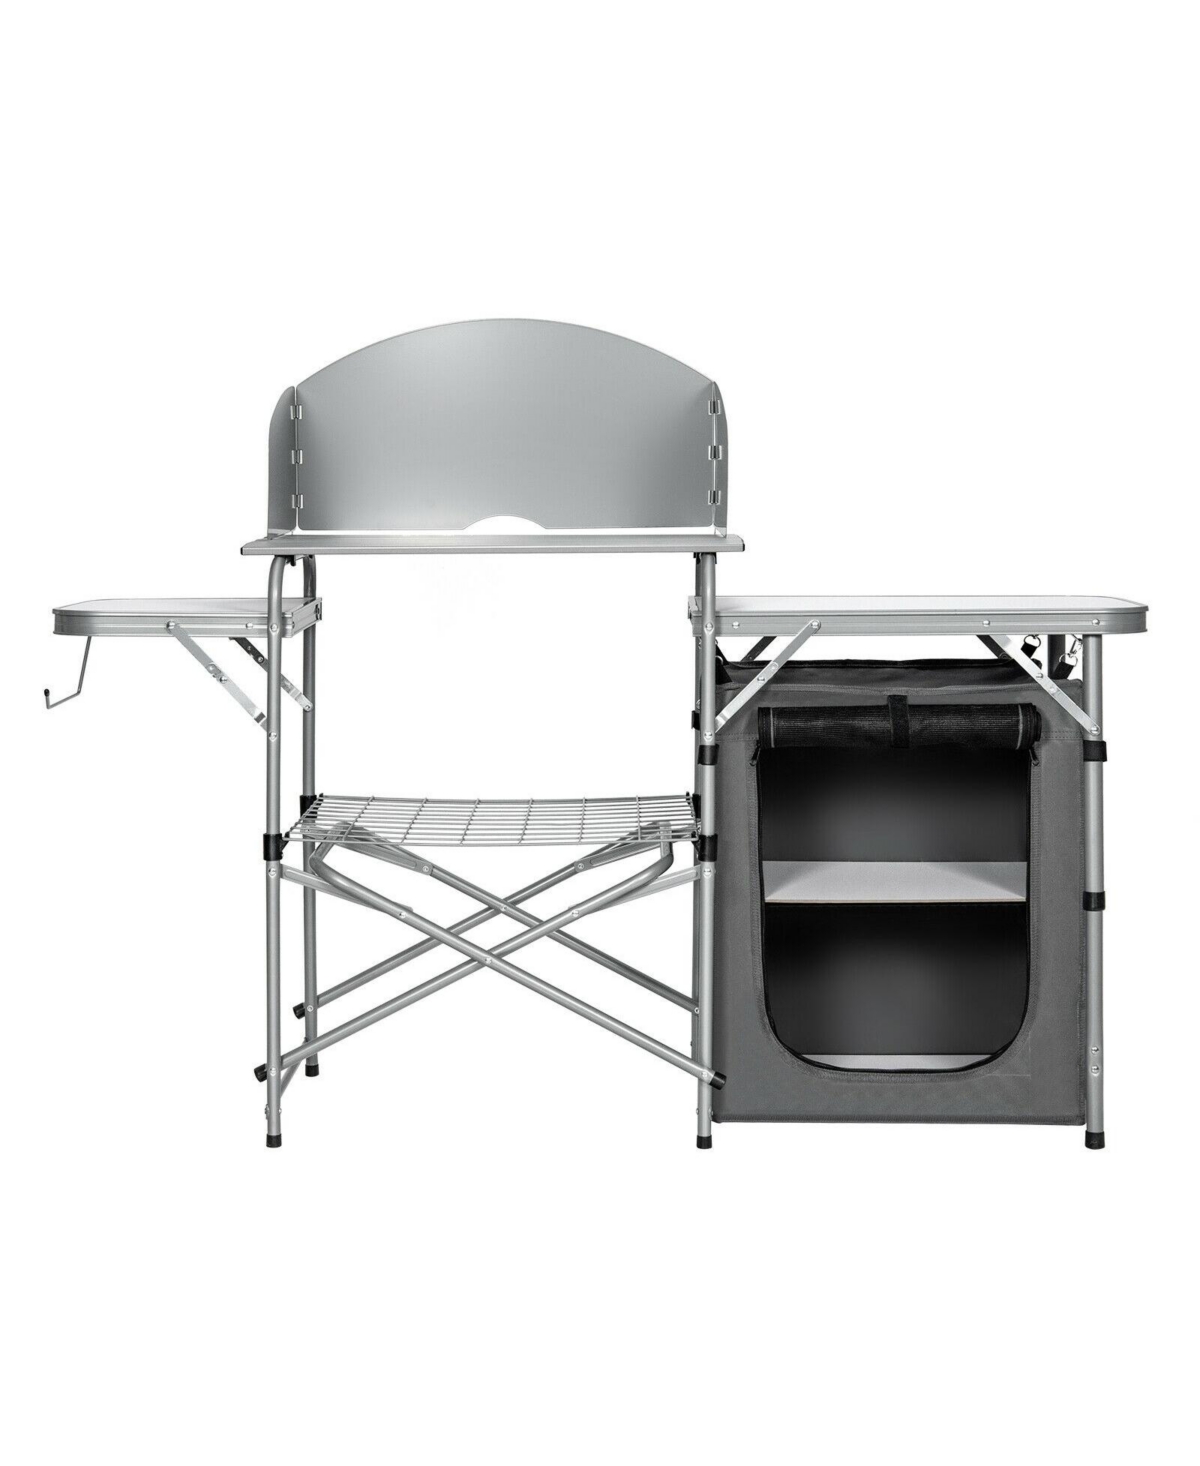 Foldable Outdoor Bbq Portable Grilling Table with Windscreen Bag - Grey